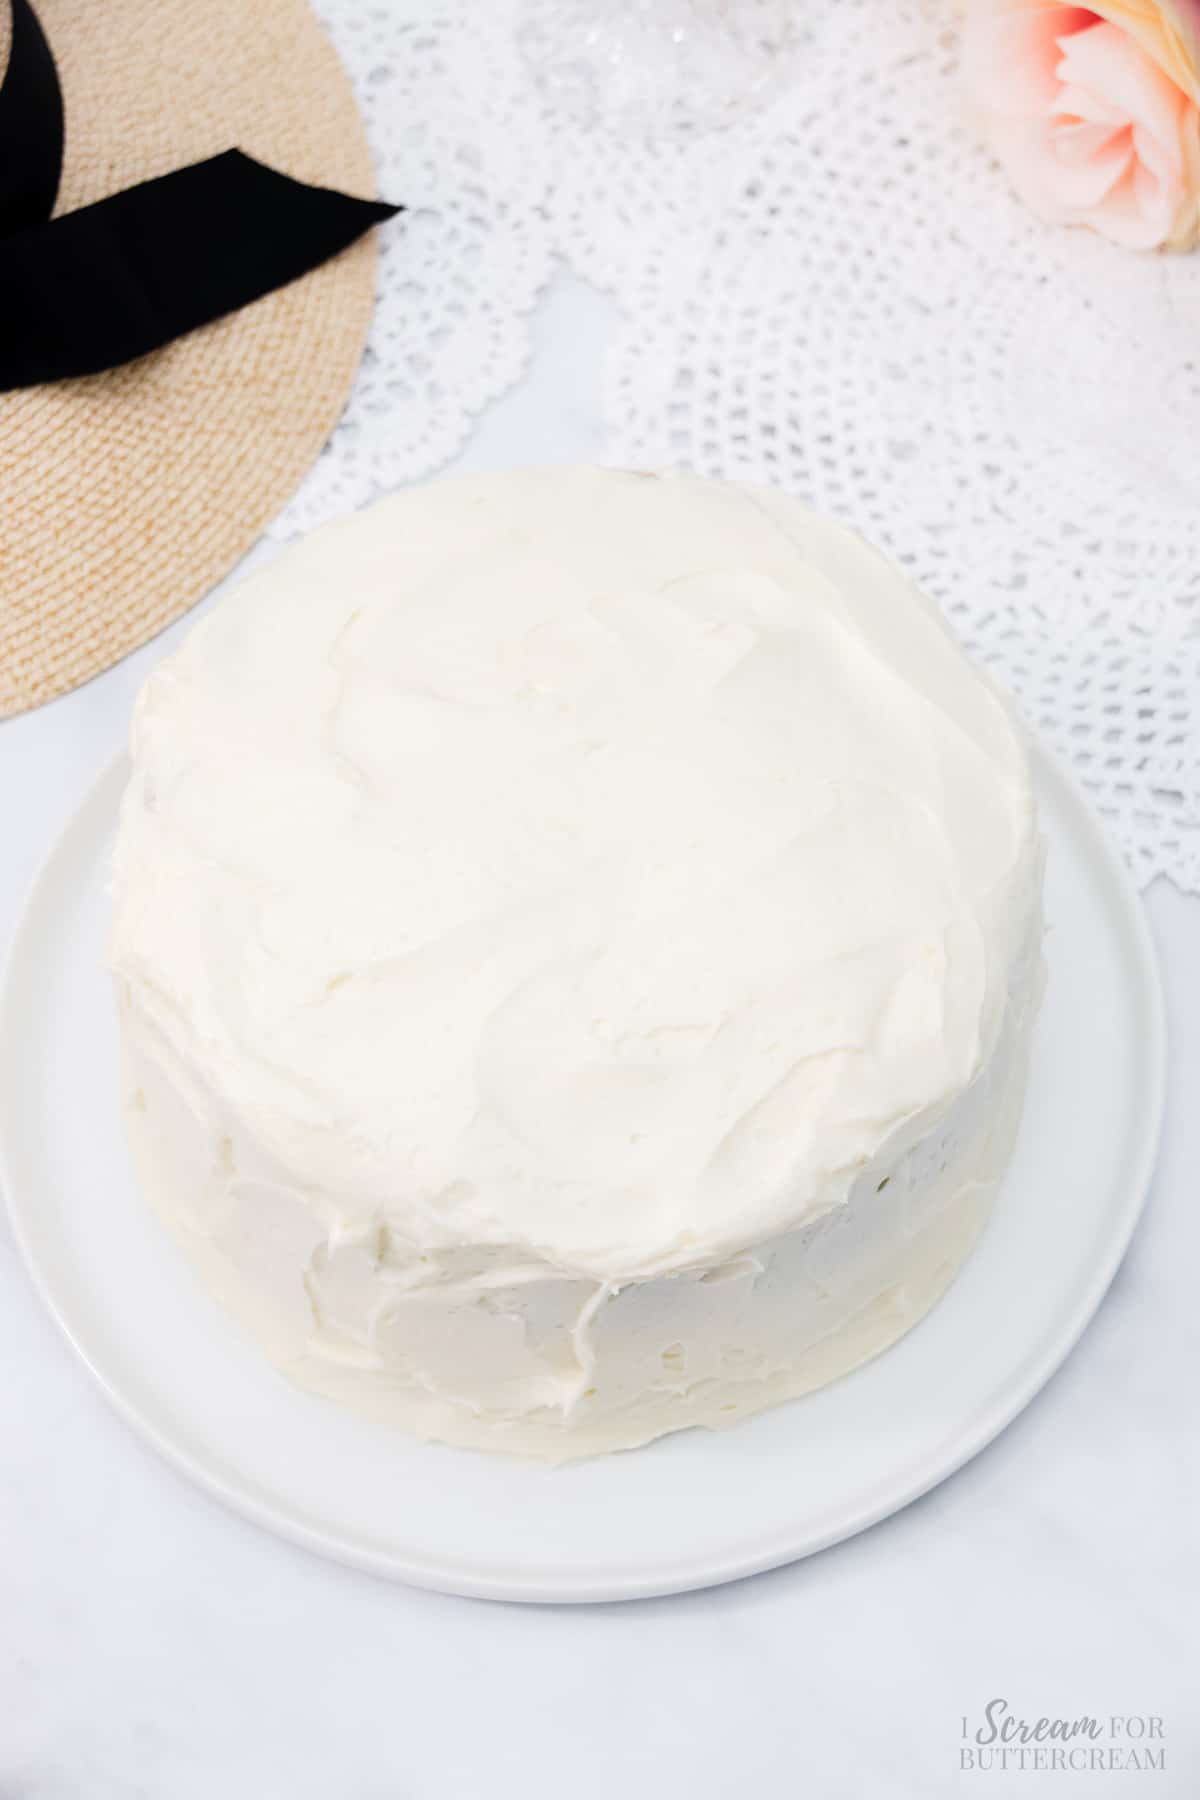 Cream cheese frosting covering a cake on a white platter.